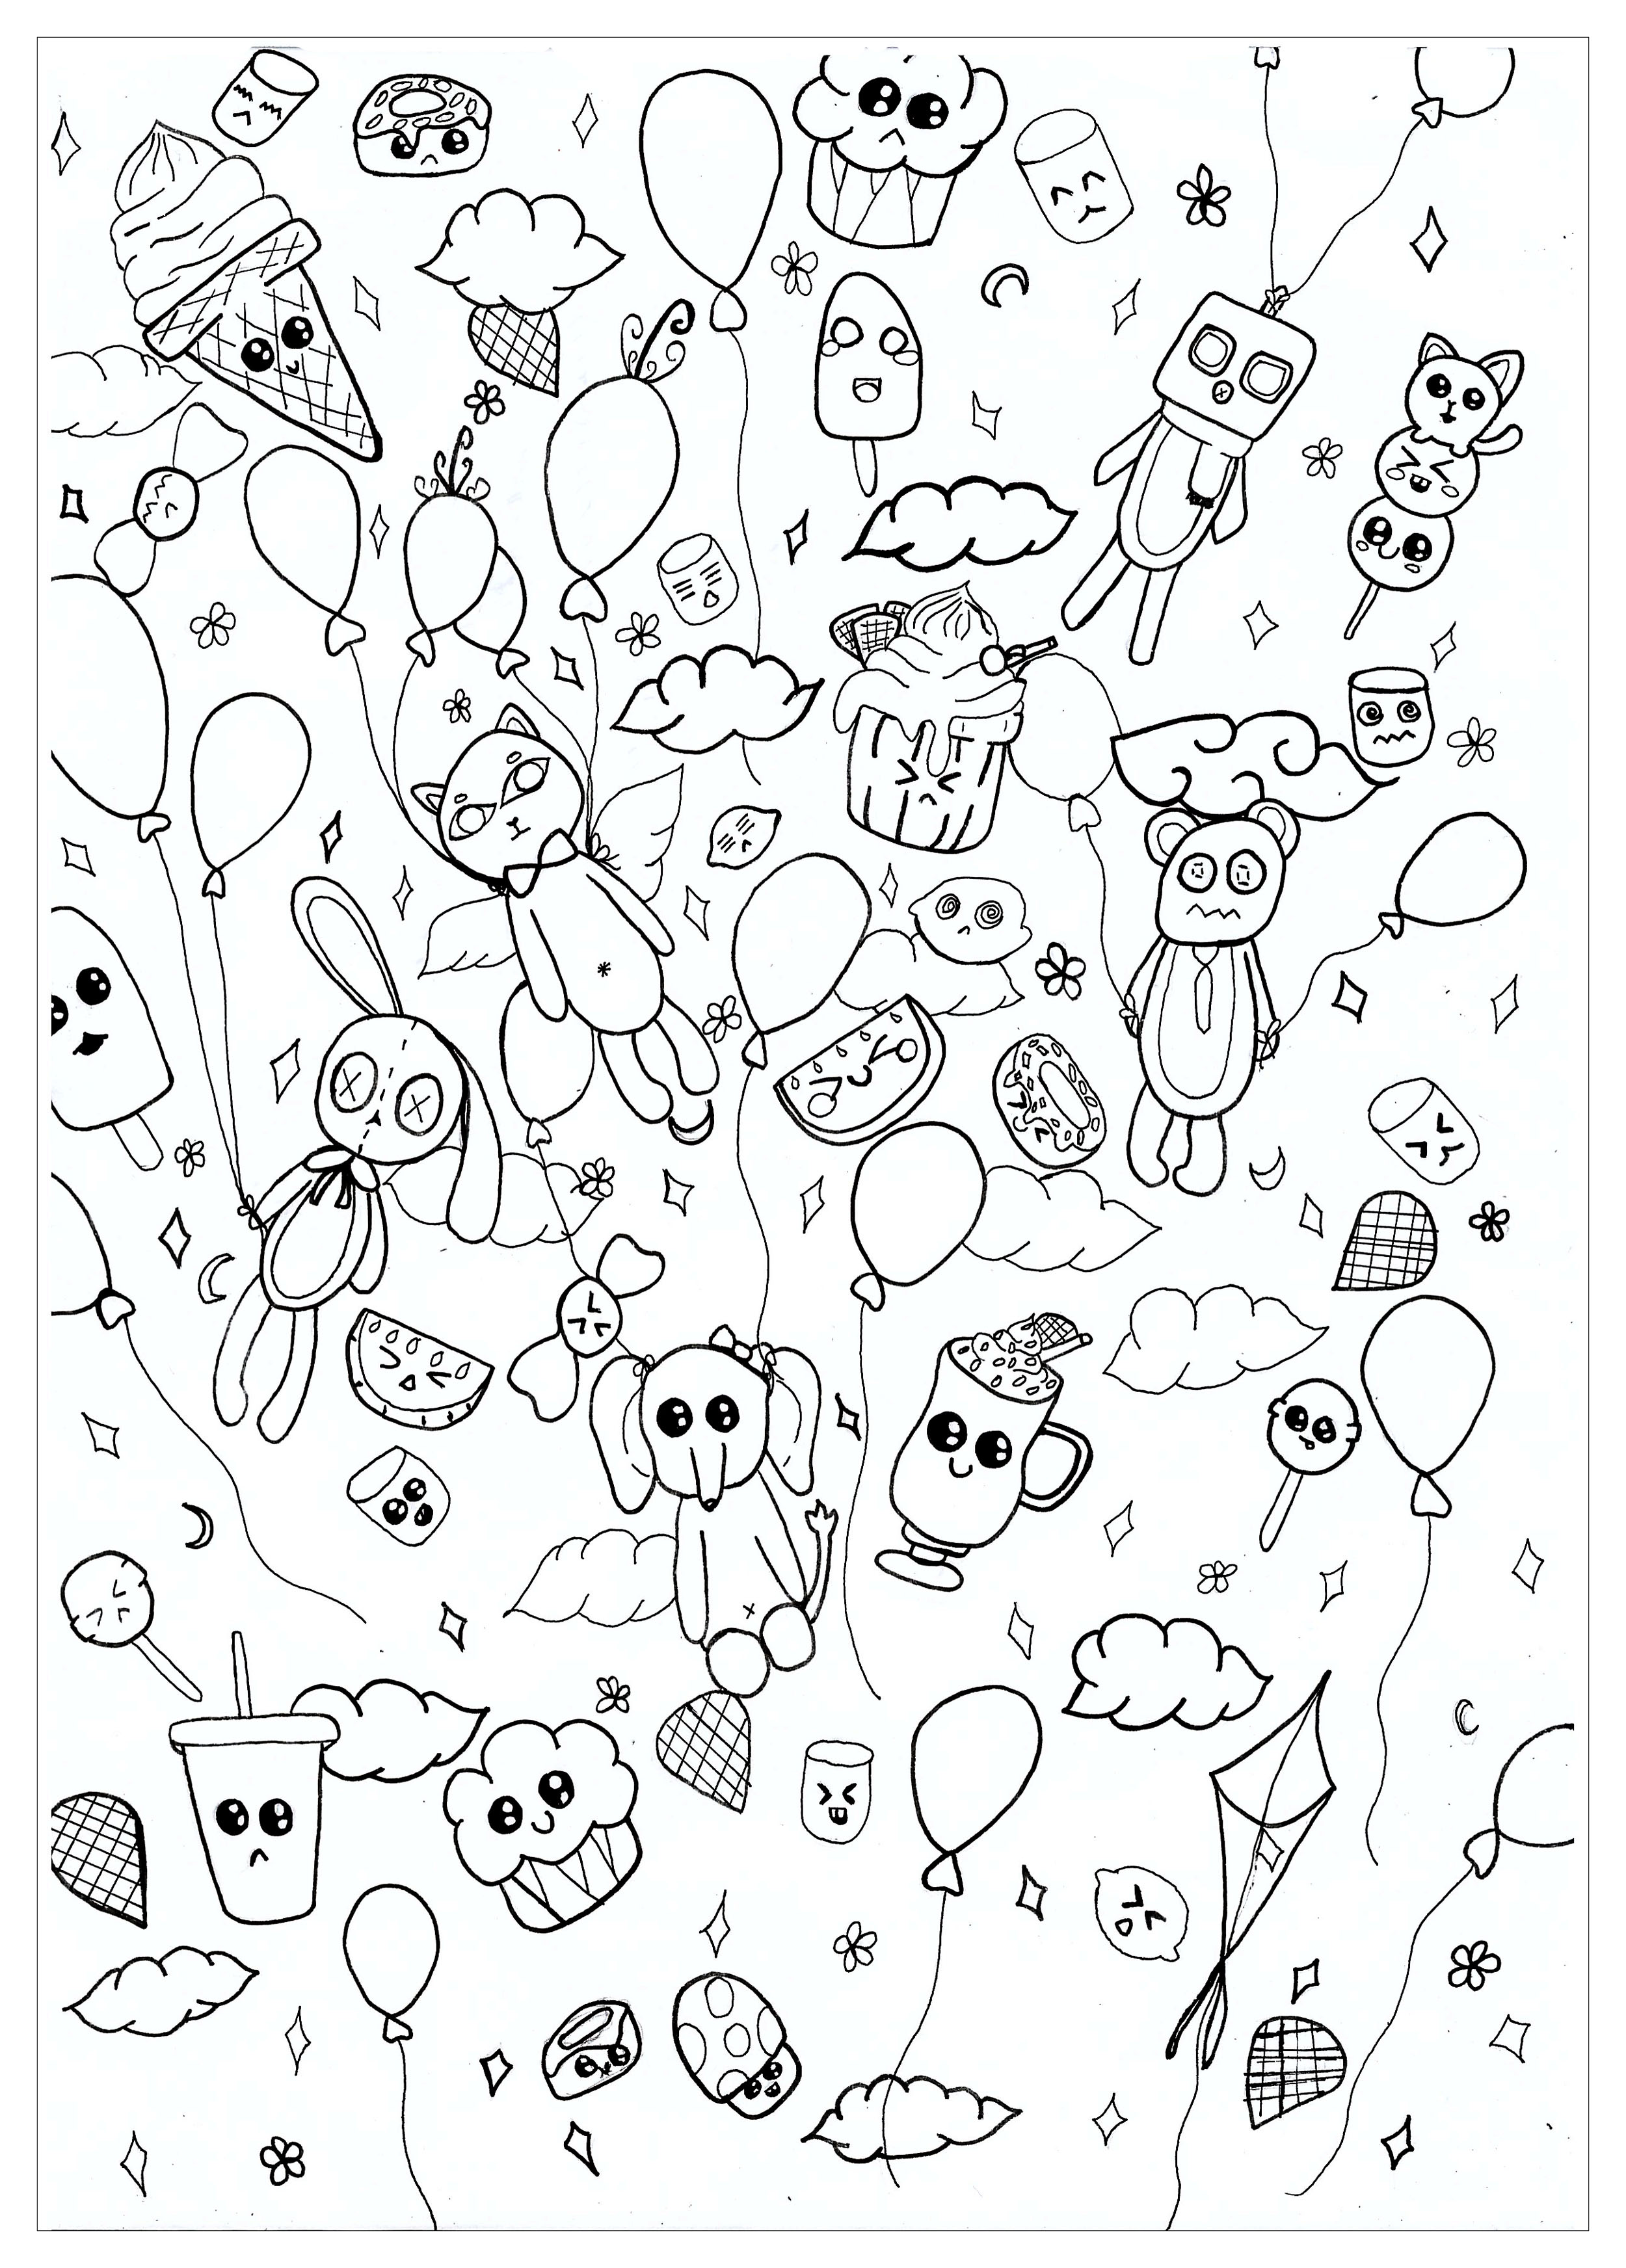 Easy Doodle Art Coloring Pages Coloring Pages